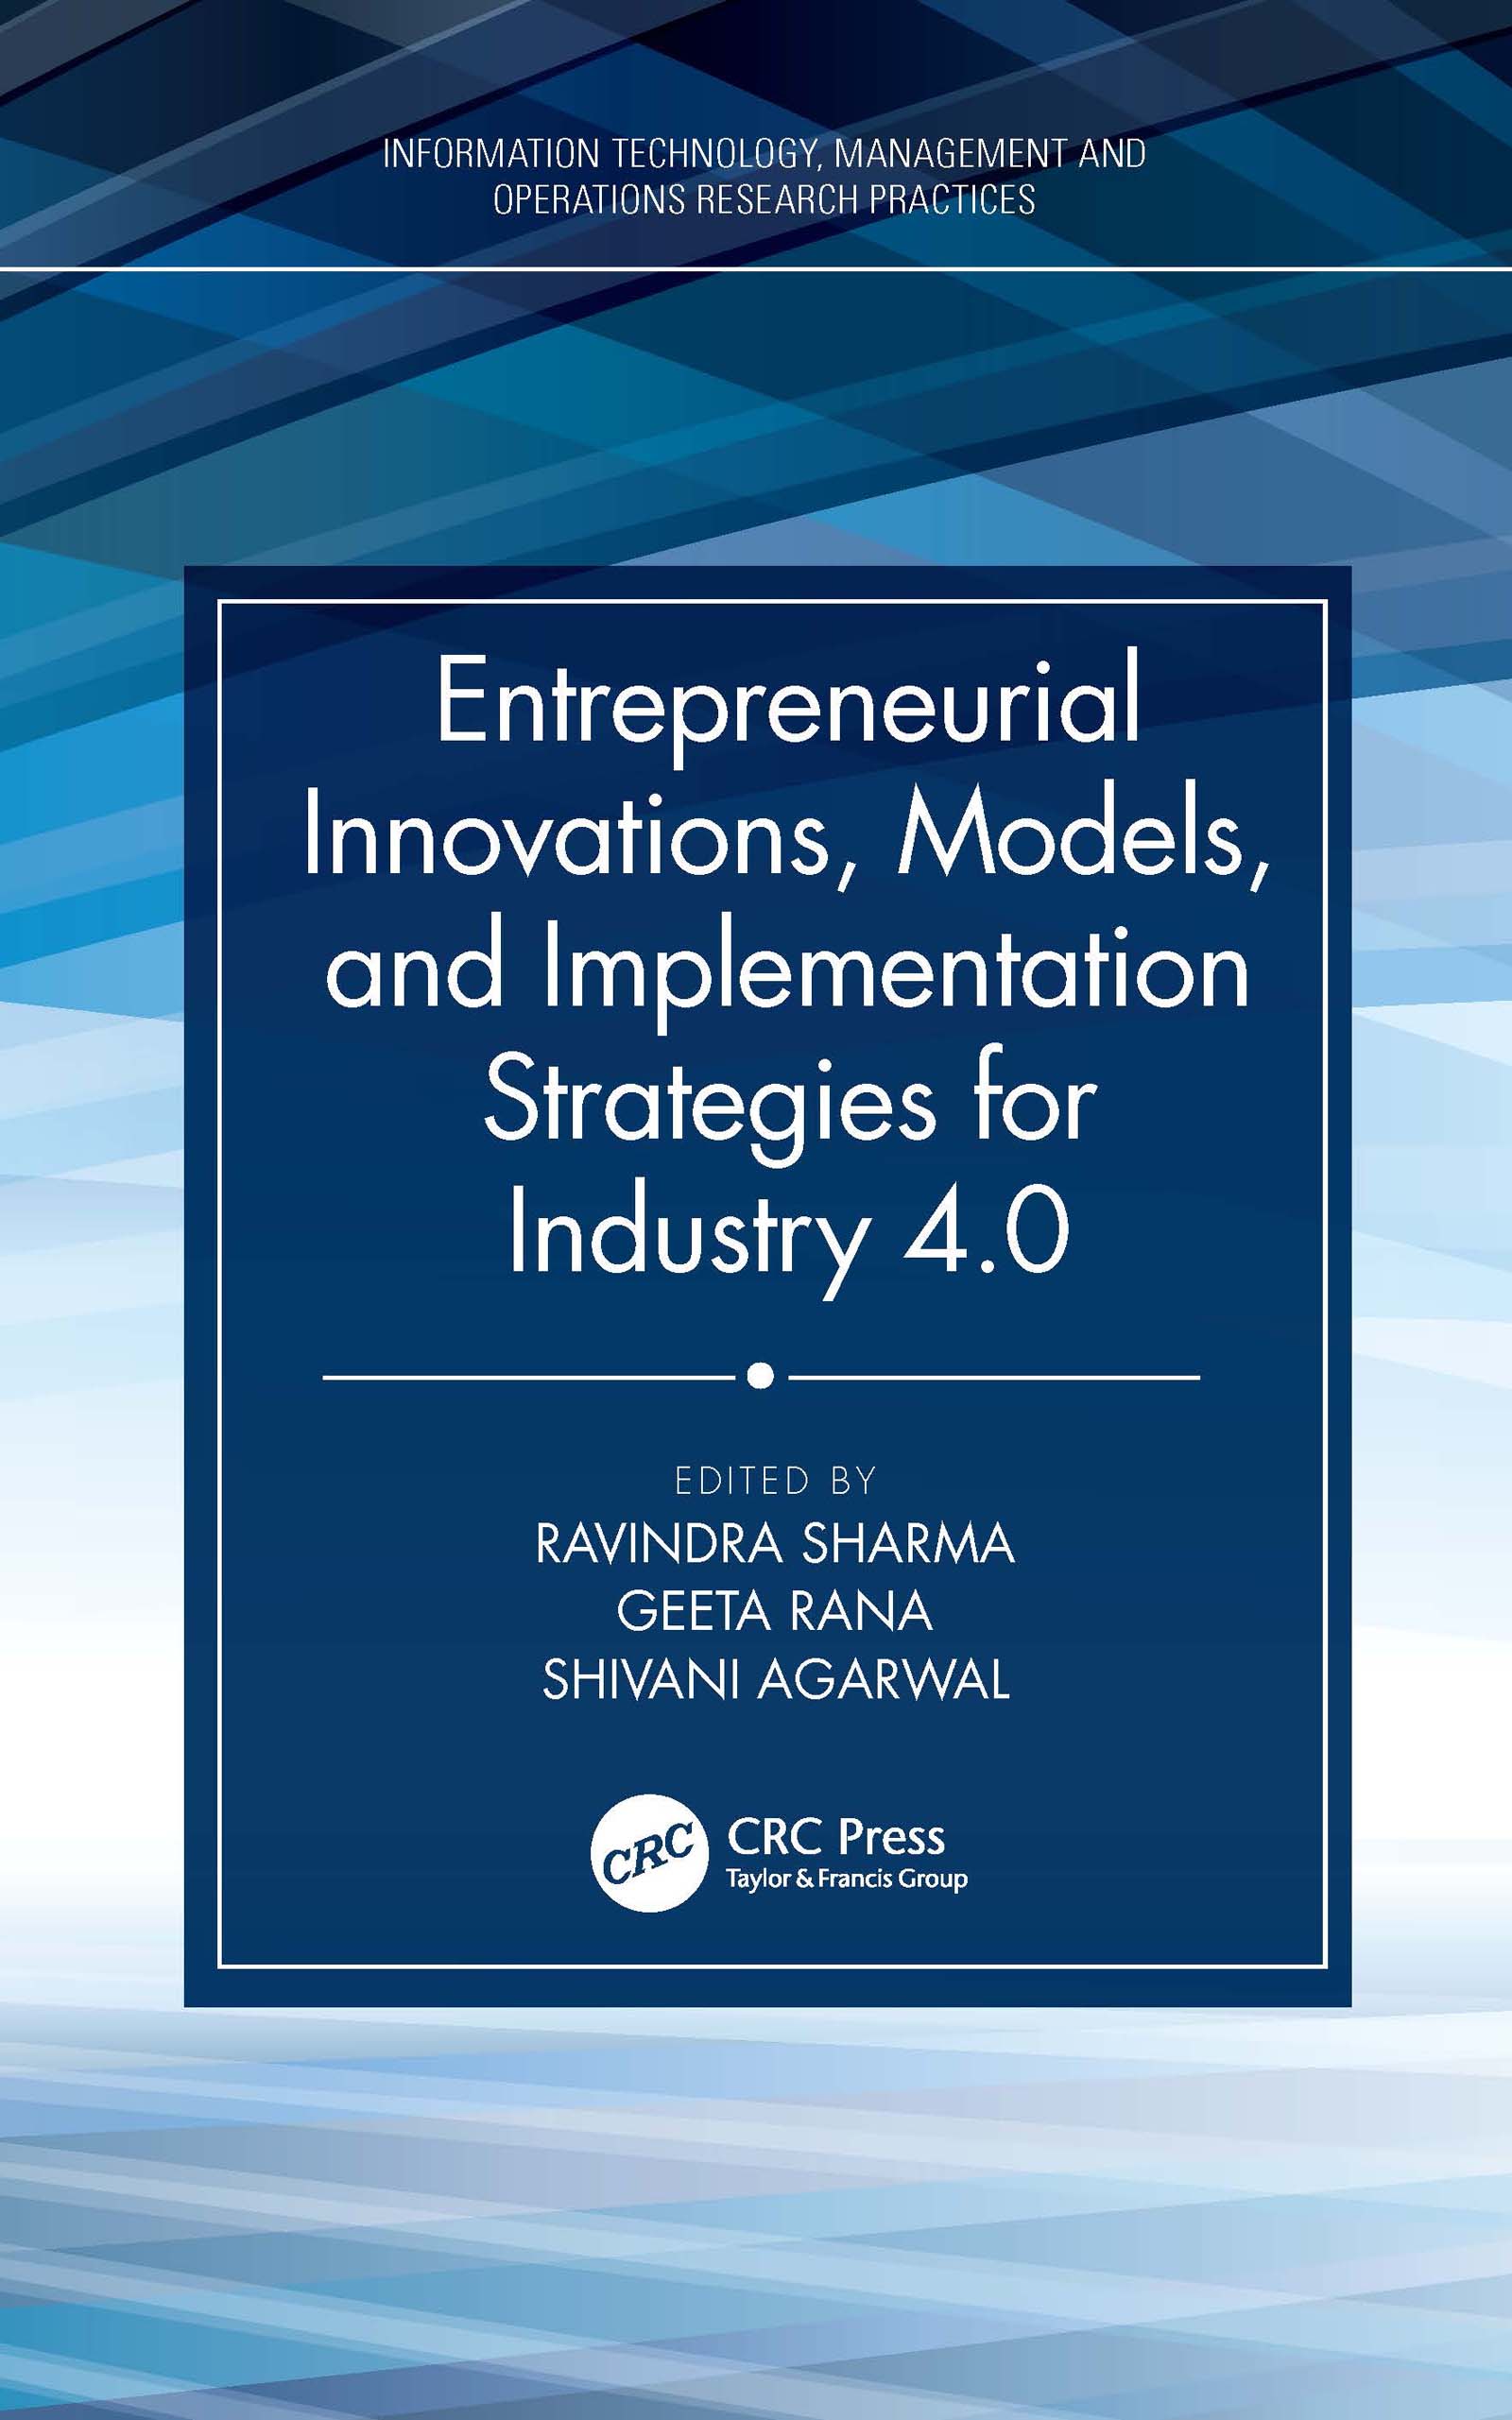 Entrepreneurial Innovations, Models, and Implementation Strategies for Industry 4.0